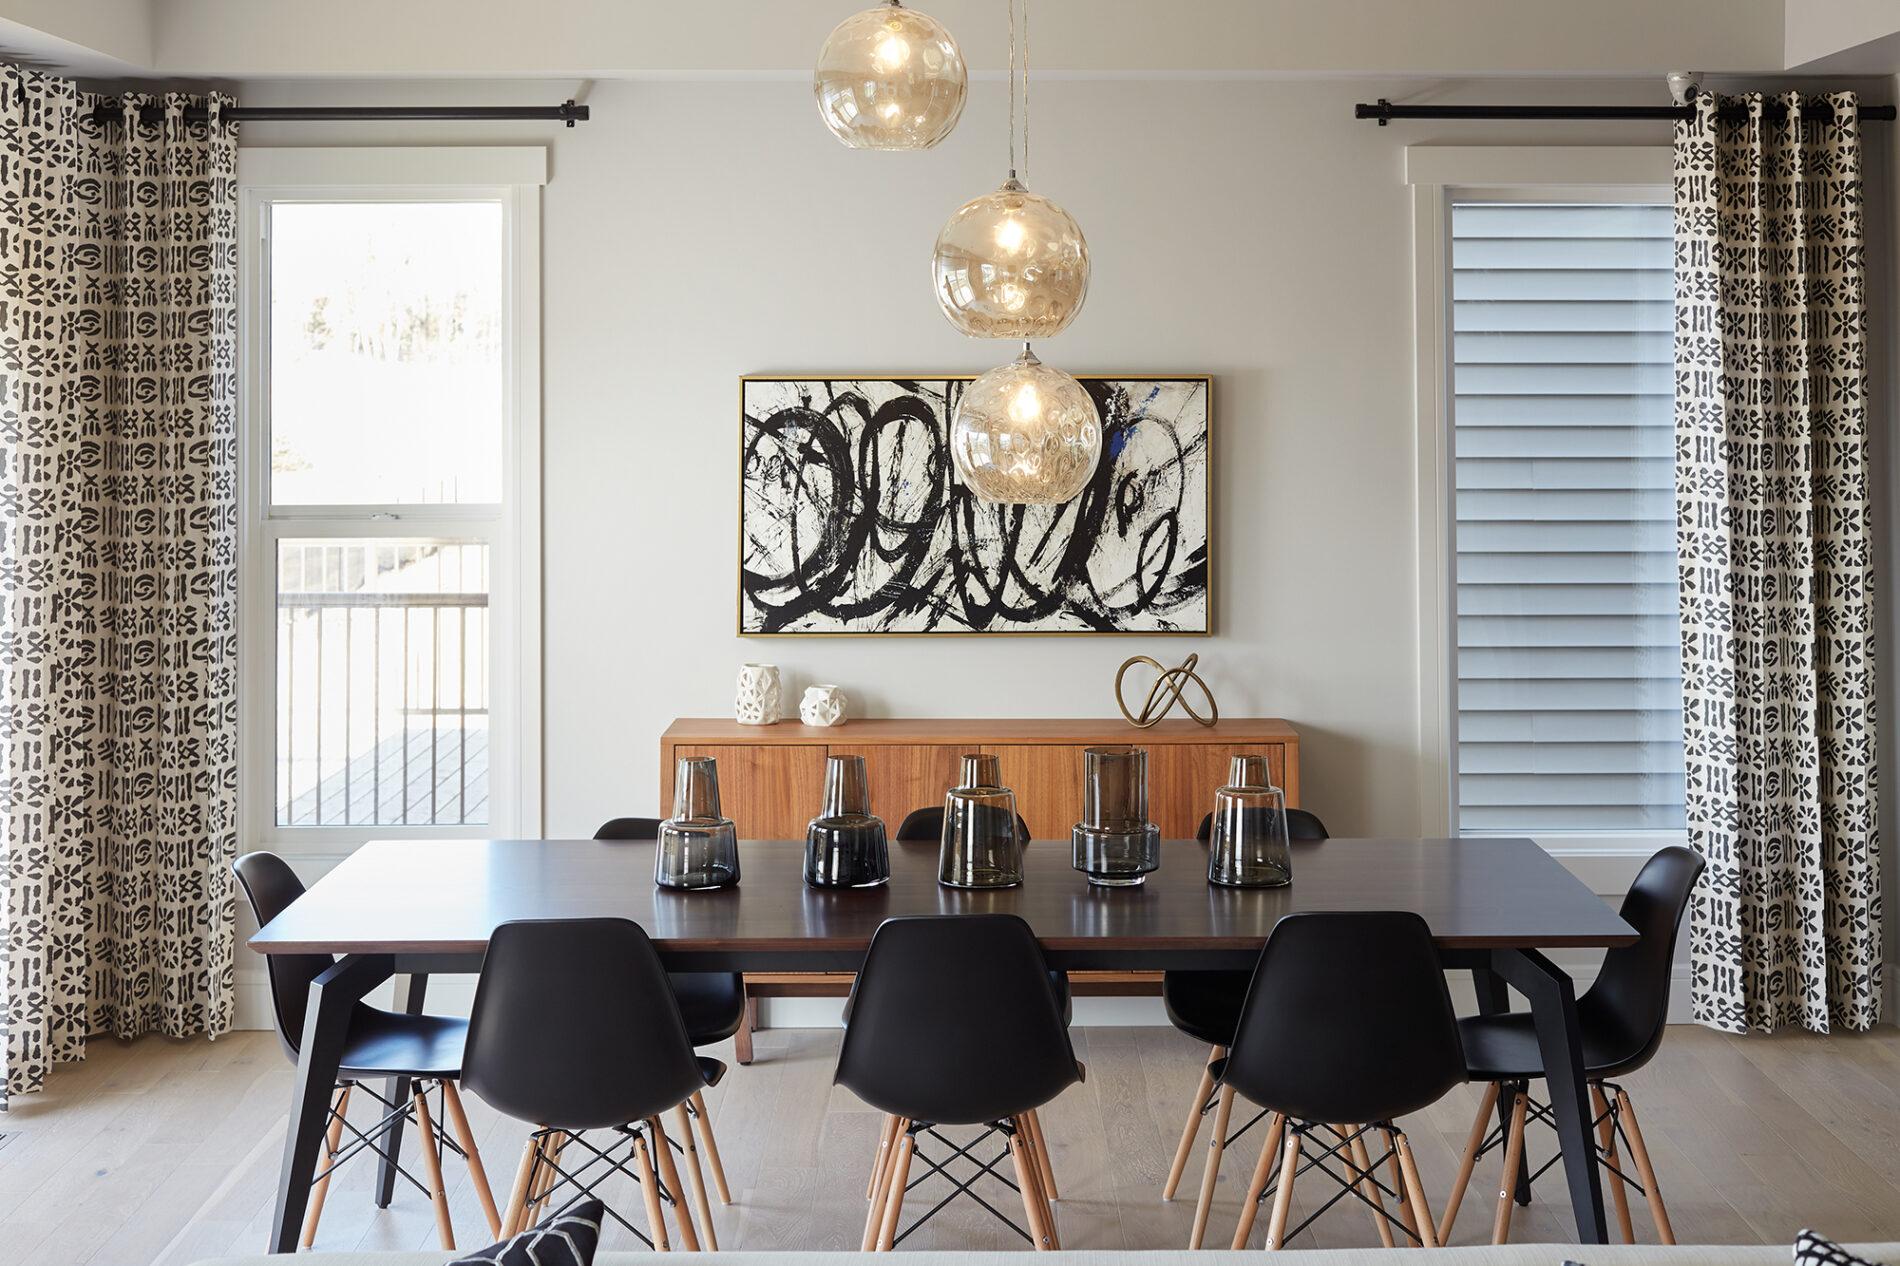 Dining room in Kalliope showhome with long dark wood table, eight black Eiffel chairs, three globe light fixtures hung at different heights above the table, a large warm wood side table against the wall between two large windows and a large piece of black and white art hanging on the wall